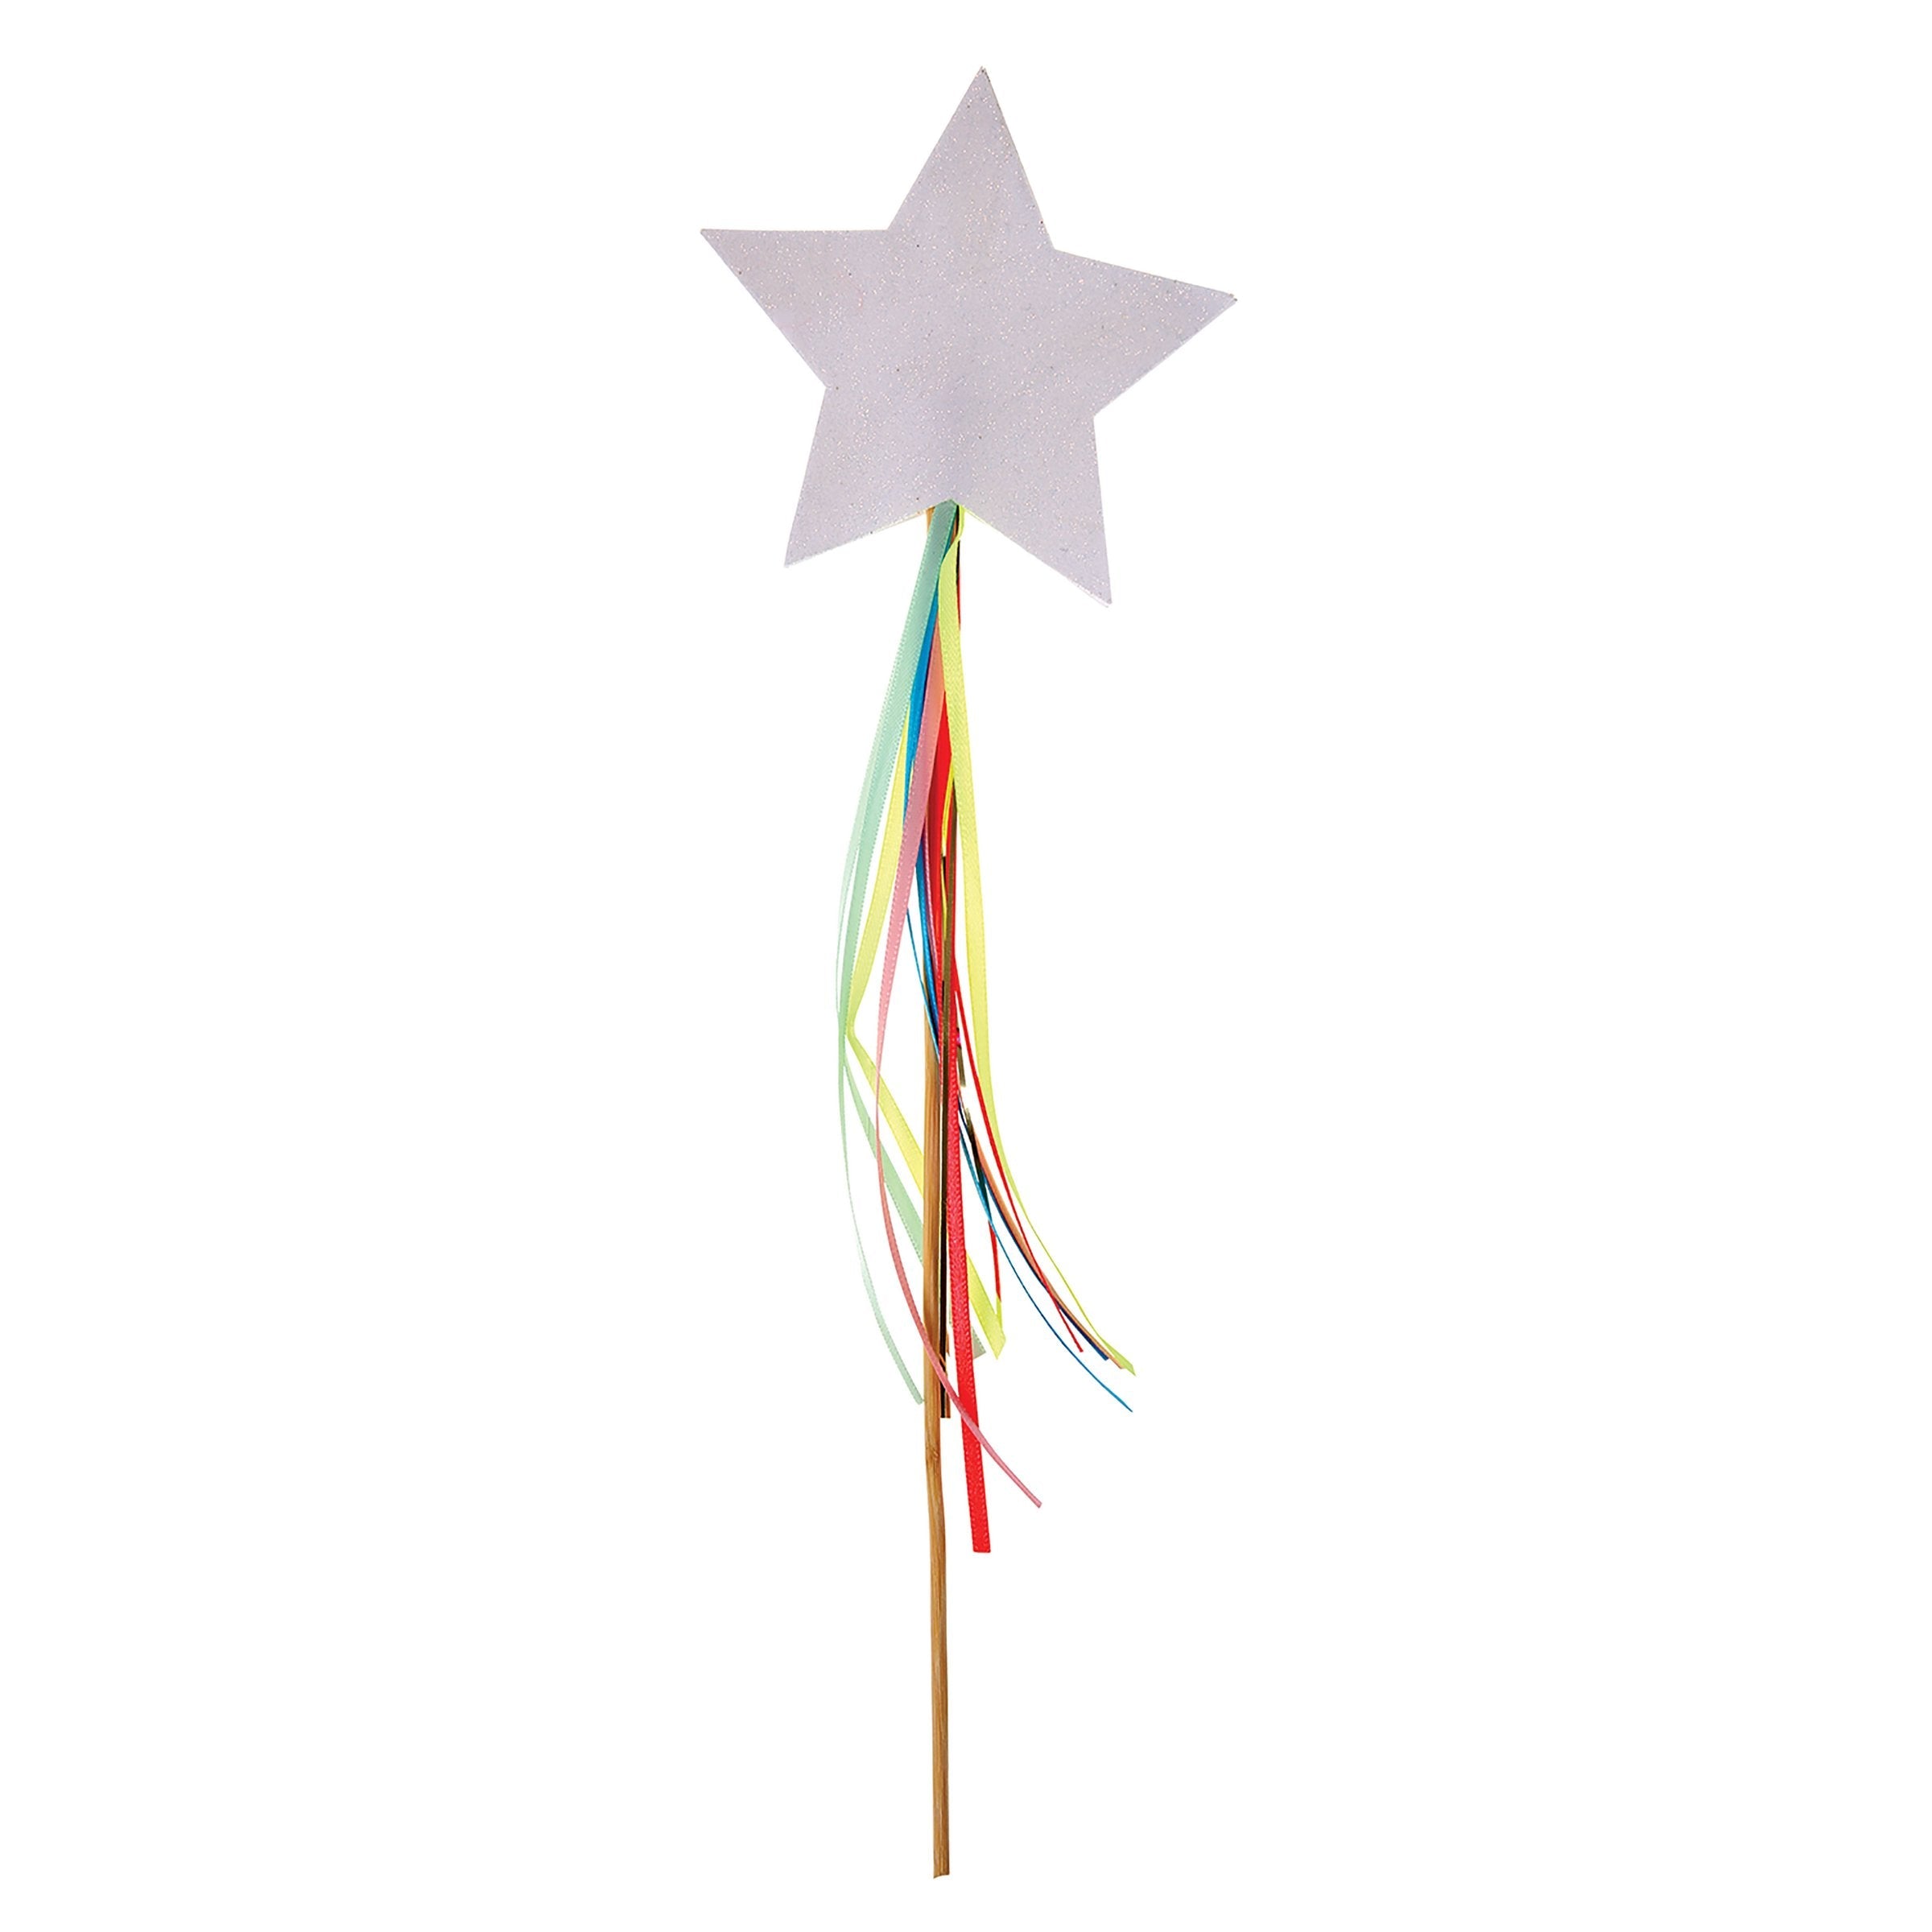 Each fairy wand has crystal glitter and colorful ribbons.